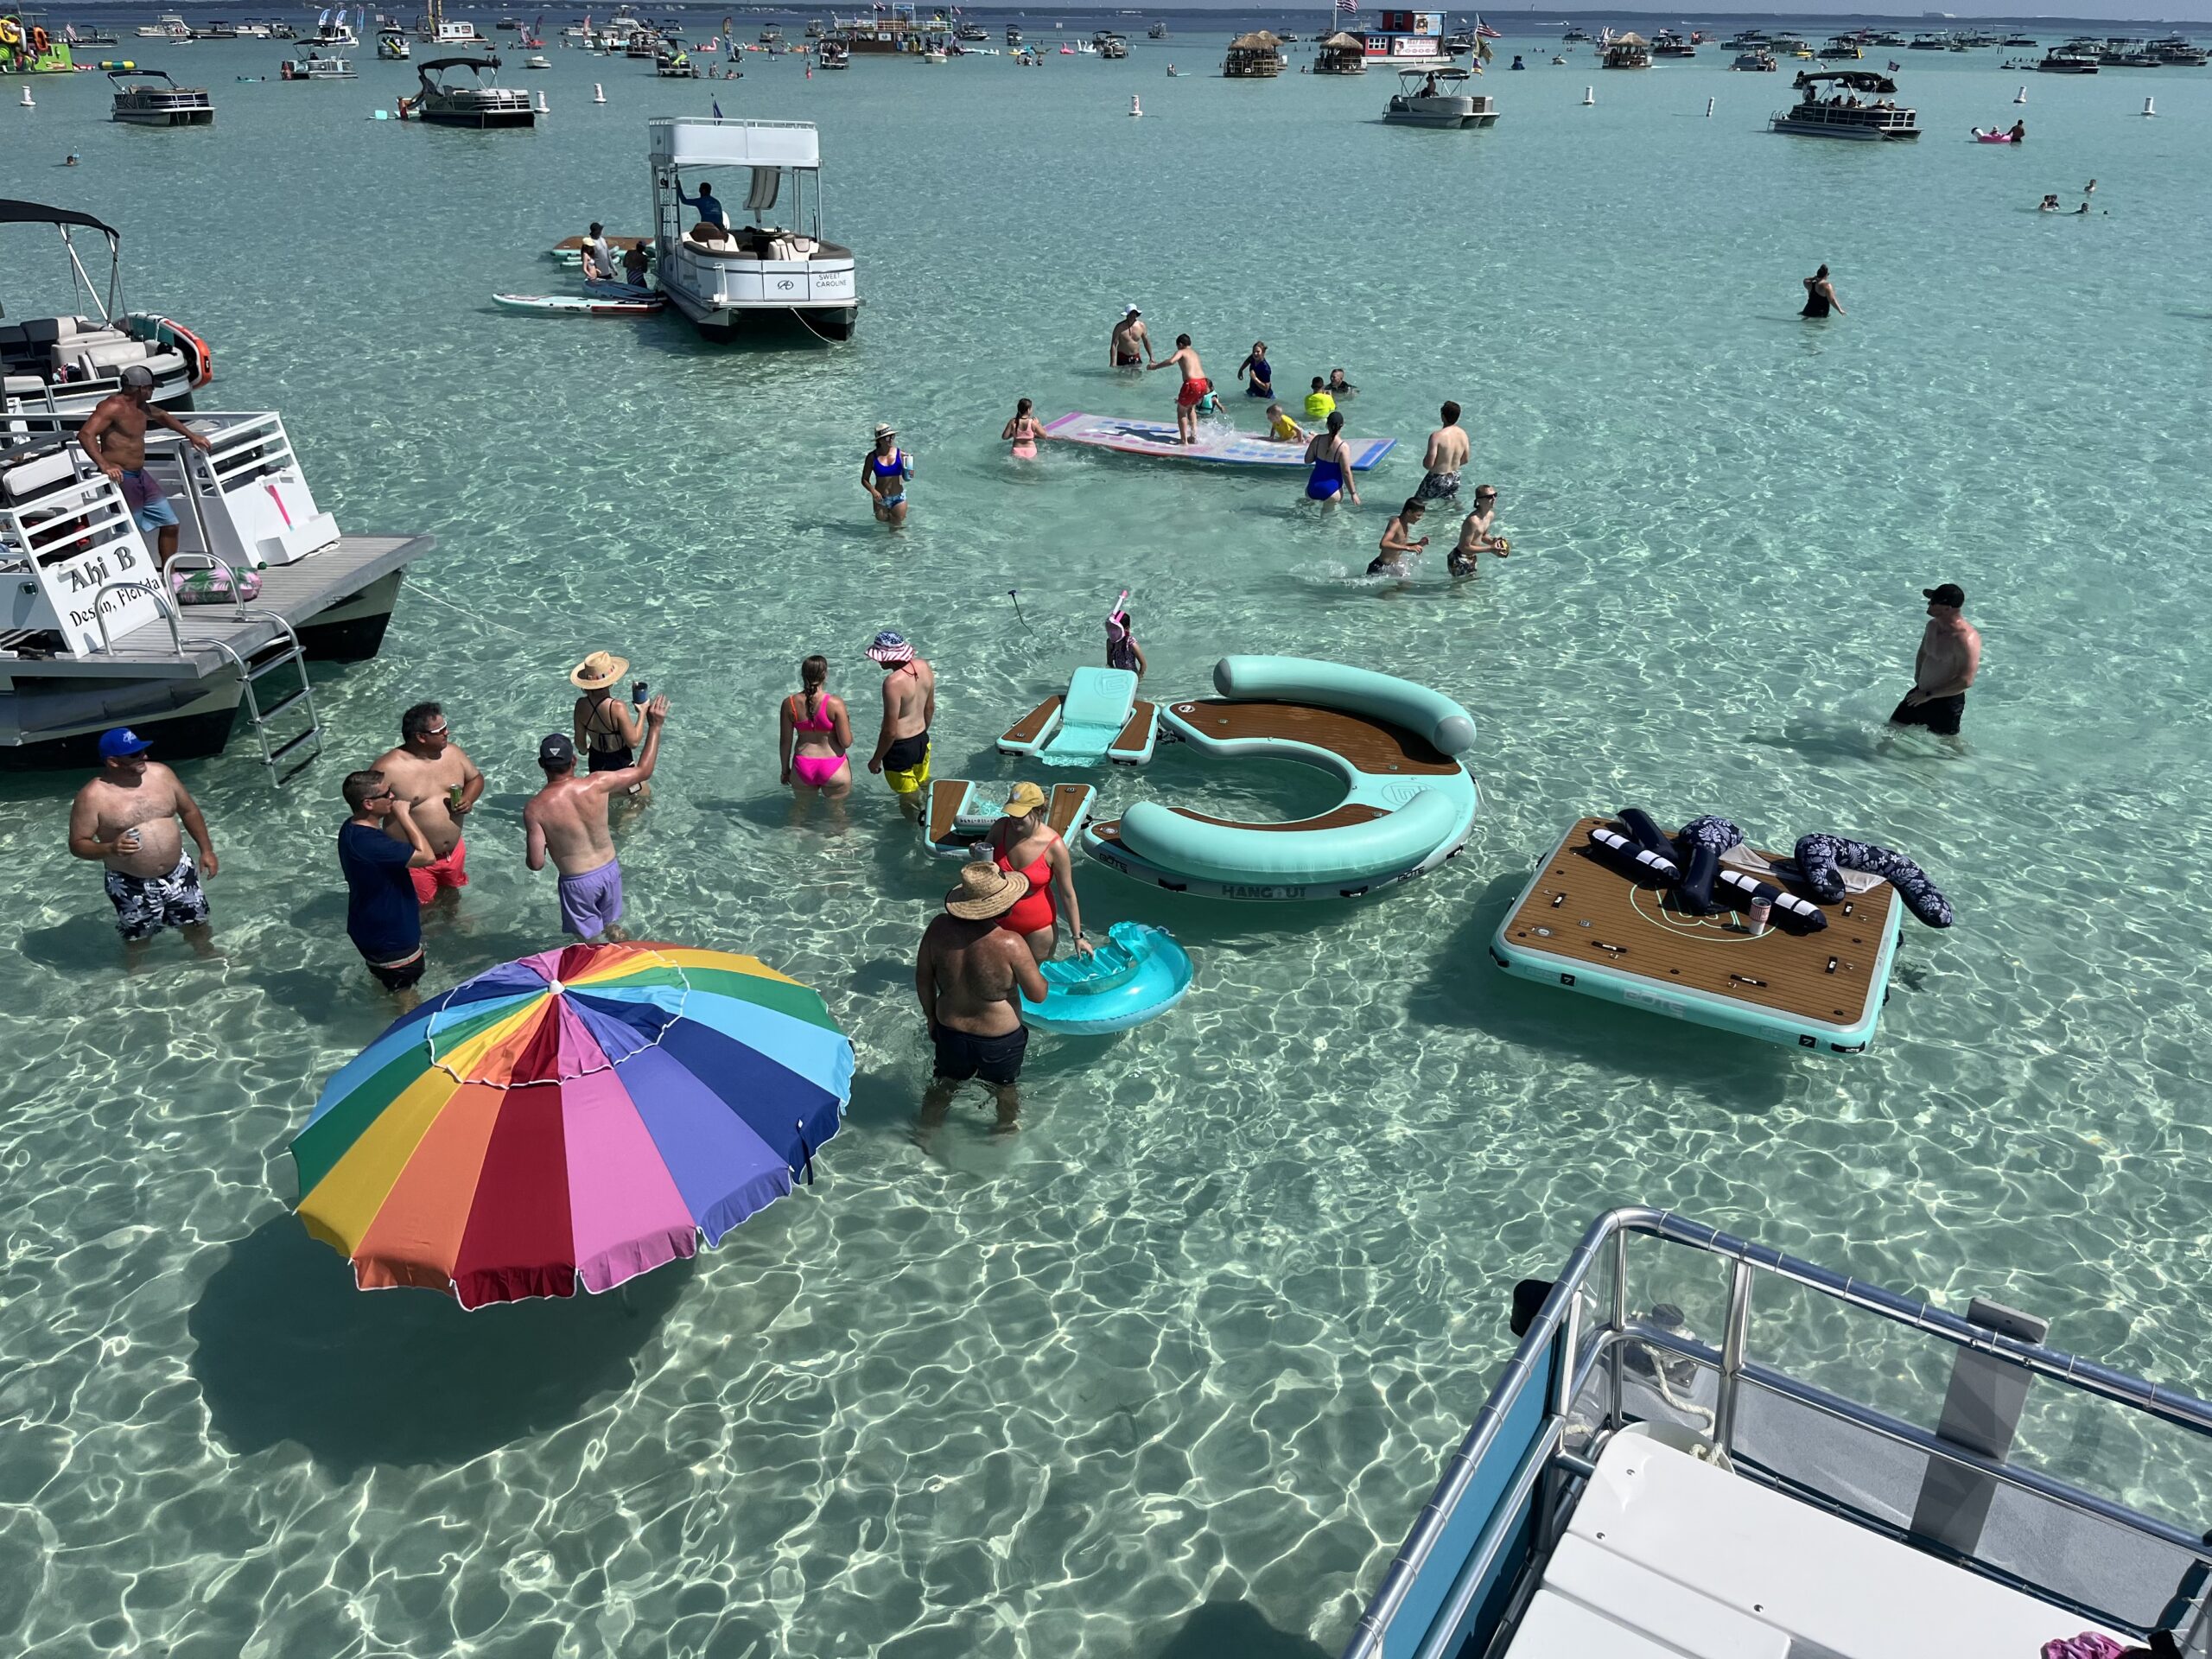 hanging out on floating toys at crab island in destin florida during bikkini bottom boat charter